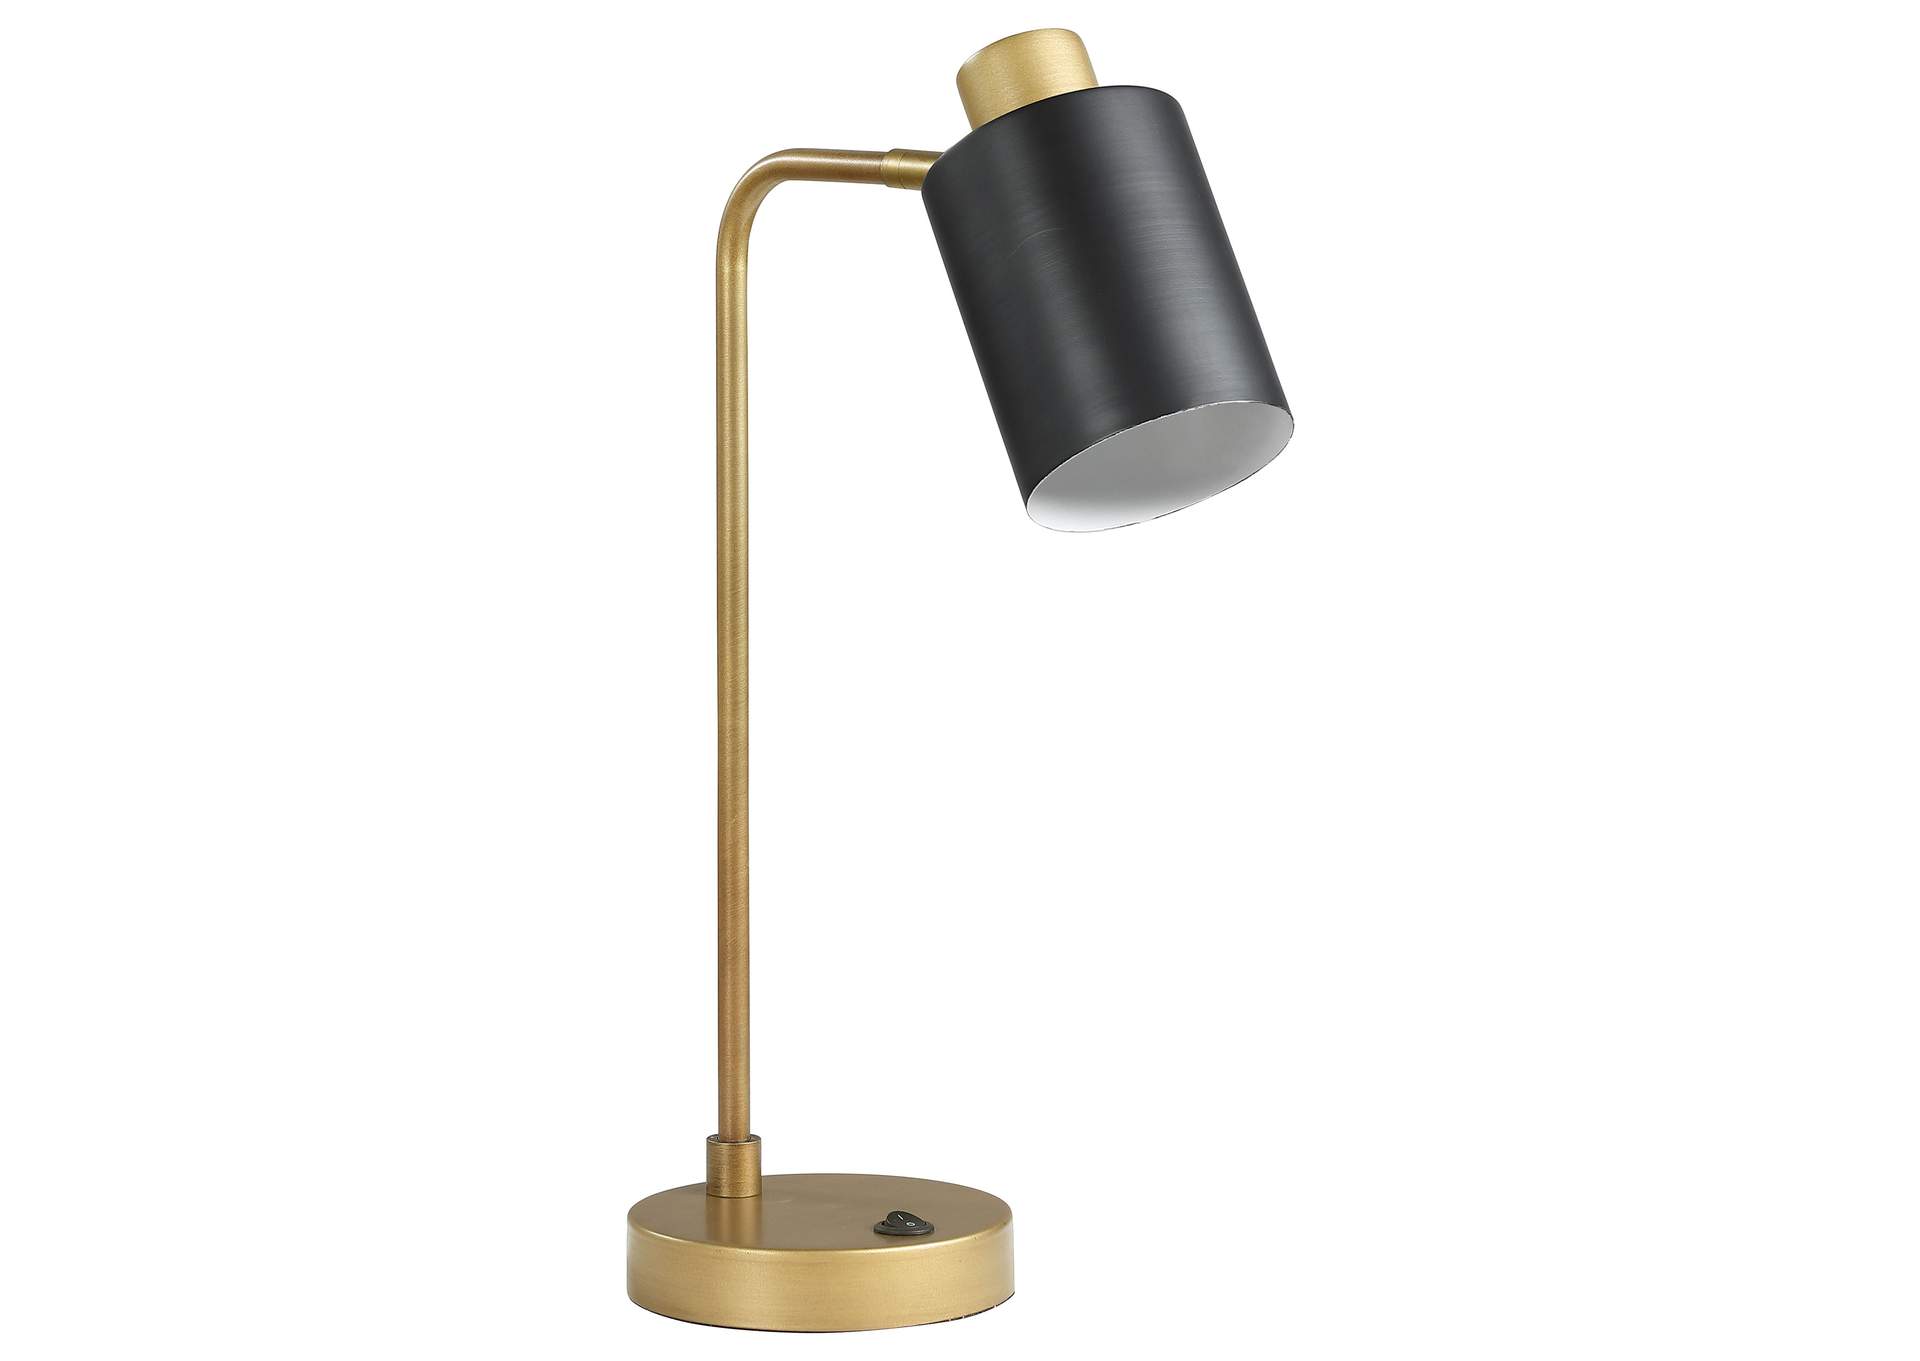 Cherise Adjustable Shade Table Lamp Antique Brass and Matte Black,Coaster Furniture